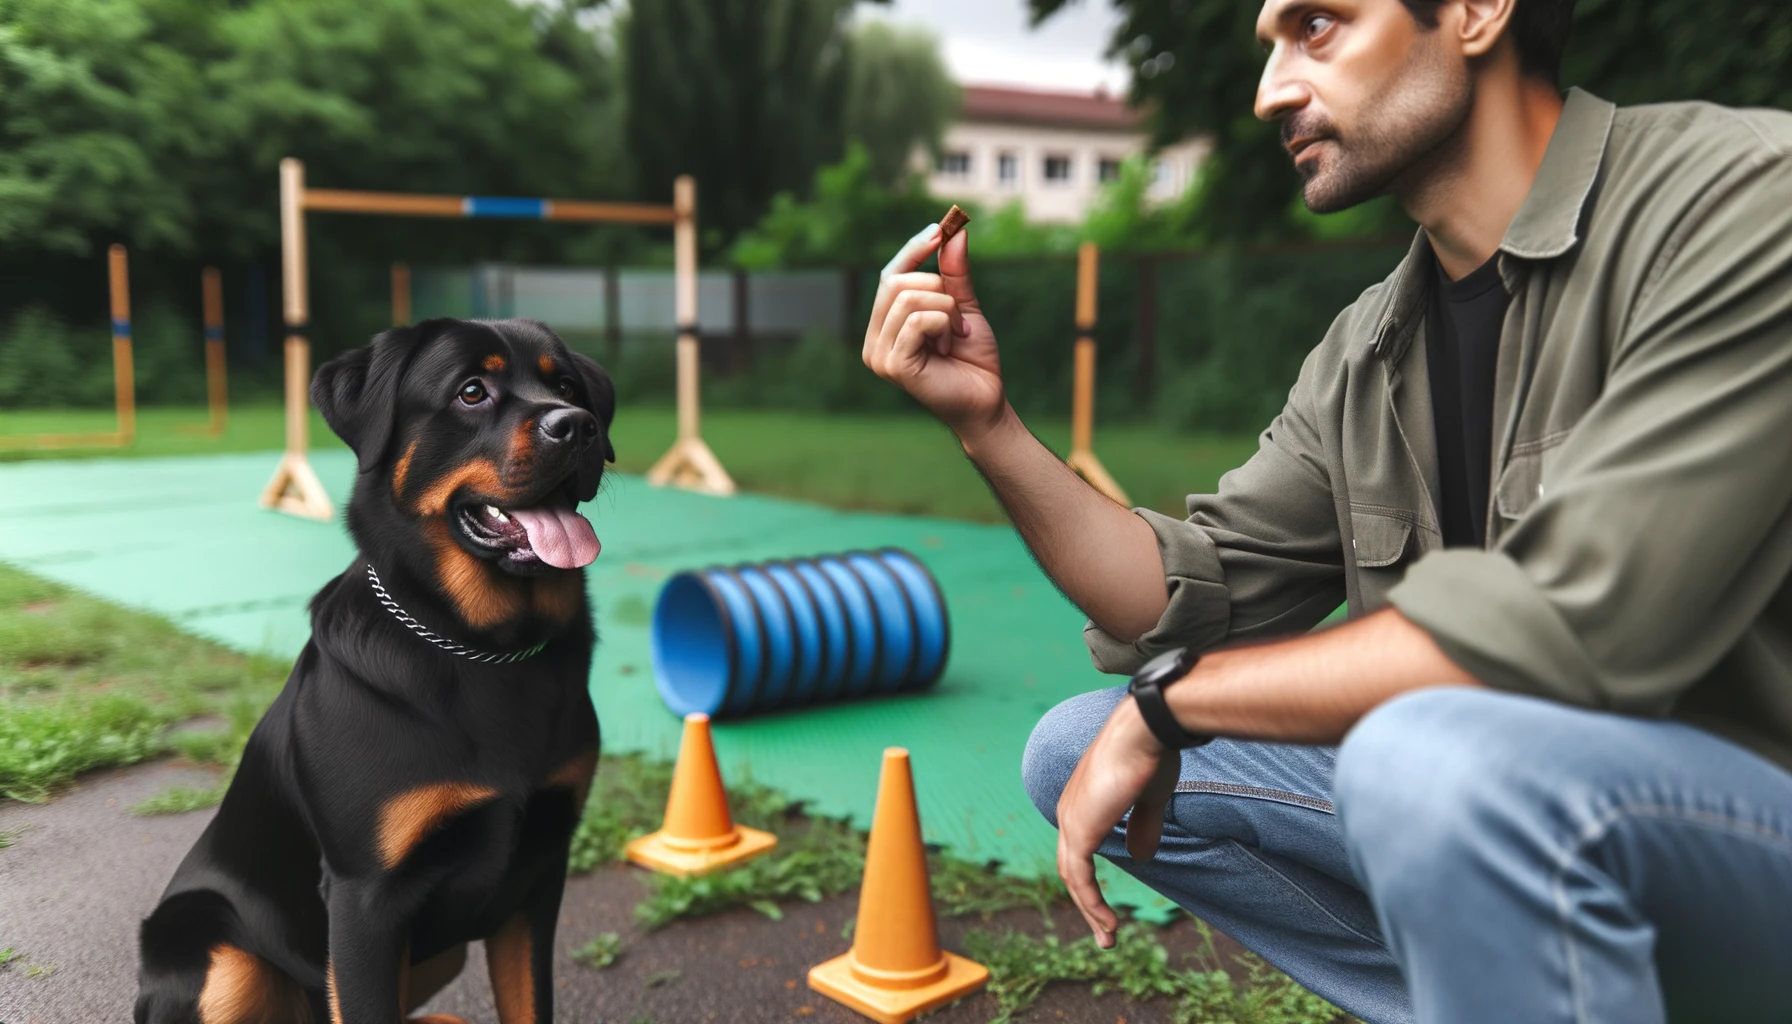 A Labrador Rottweiler Mix eagerly participating in a training session, demonstrating both their intelligence and need for consistent training.